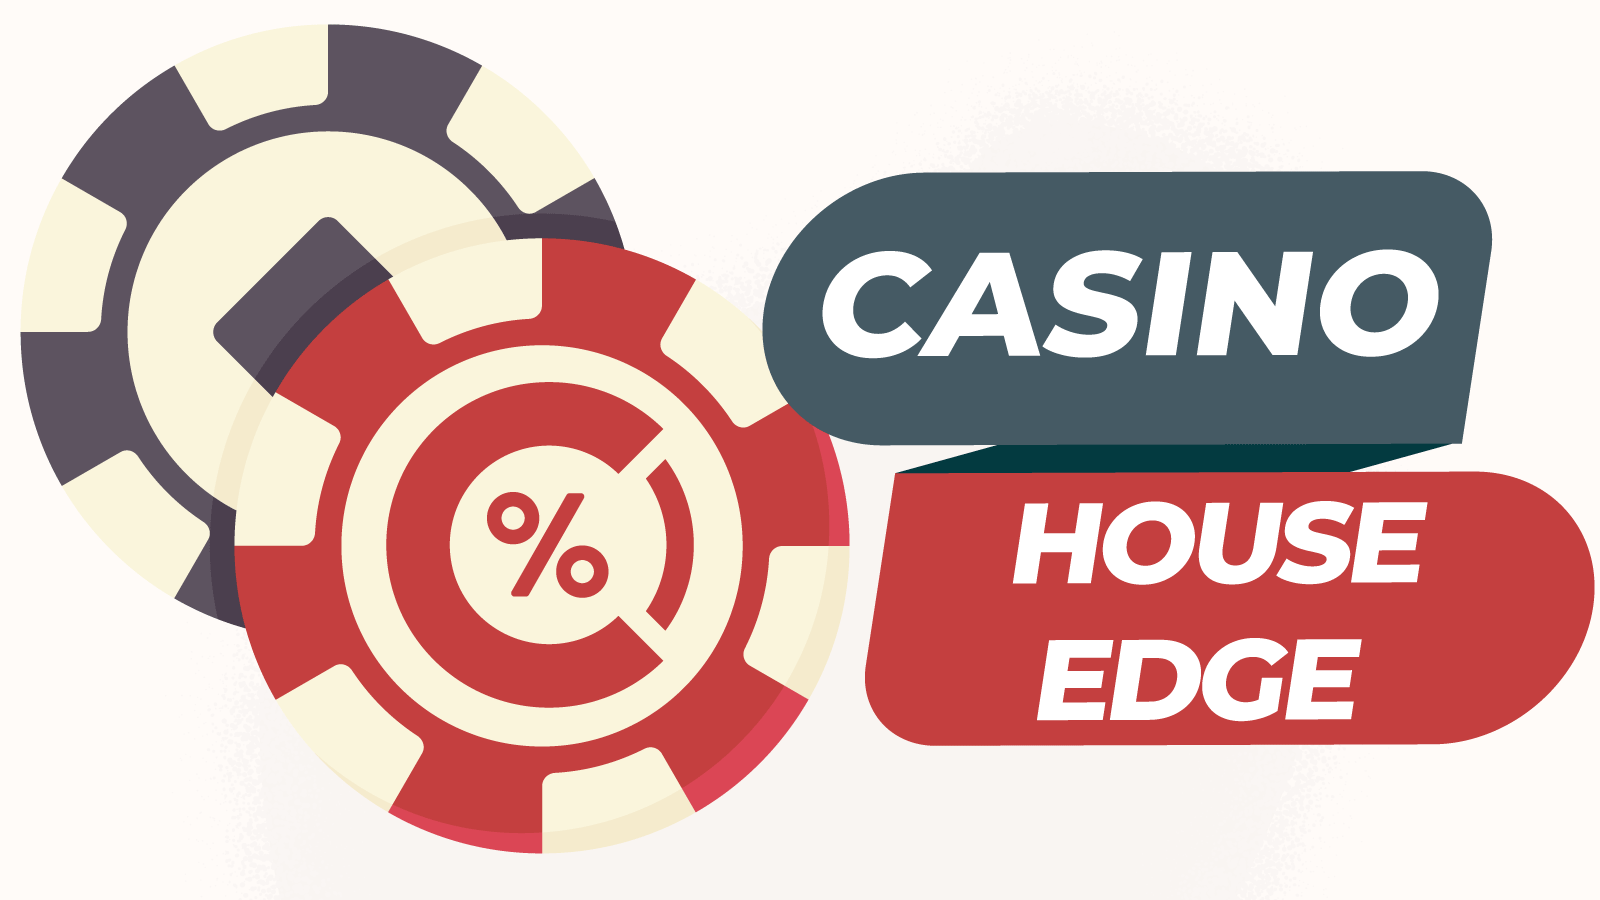 I Don't Want To Spend This Much Time On casino. How About You?